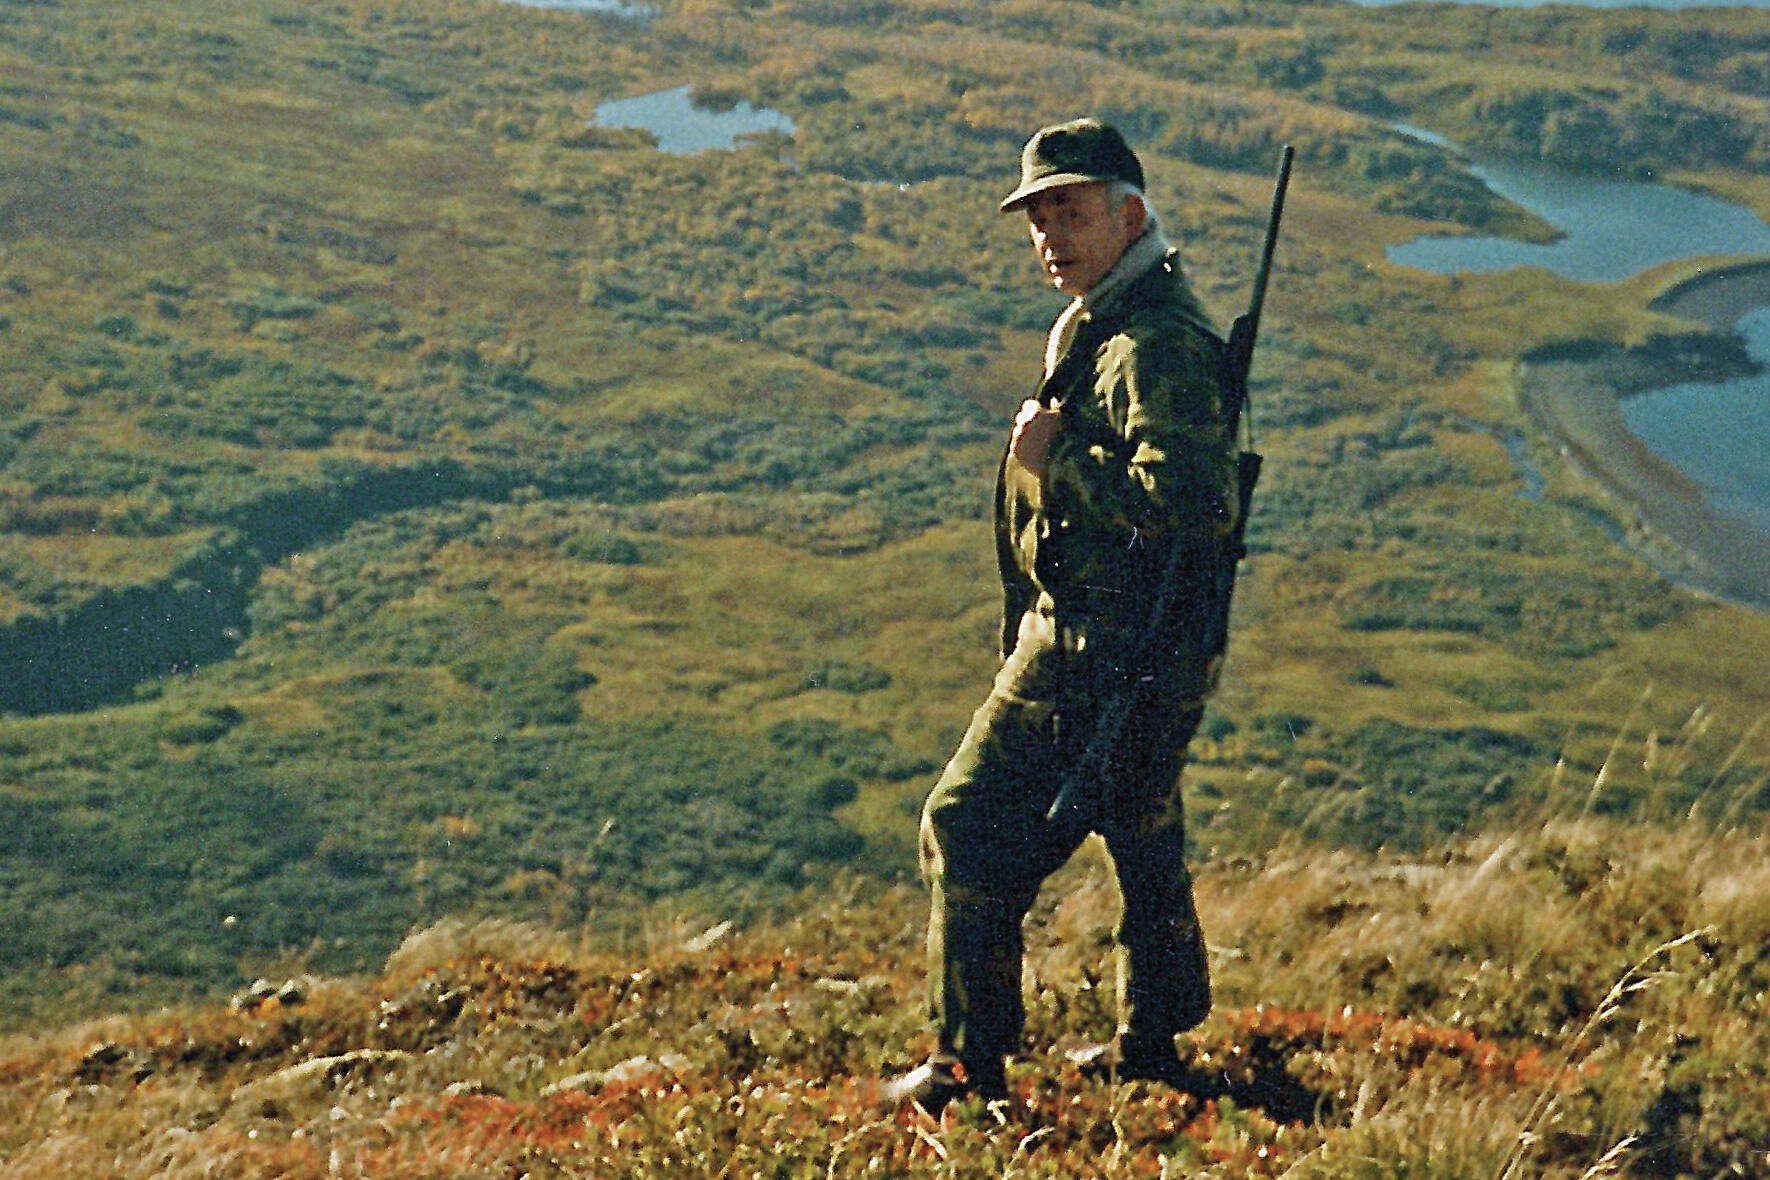 Calvin Fair, in his element, on Buck Mountain, above Chief Cove on Kodiak Island, in October 1986. His hunting partner and longtime friend Will Troyer captured this image while they were on one of the duo’s annual deer-hunting trips. (Photo courtesy of the Fair Family Collection)